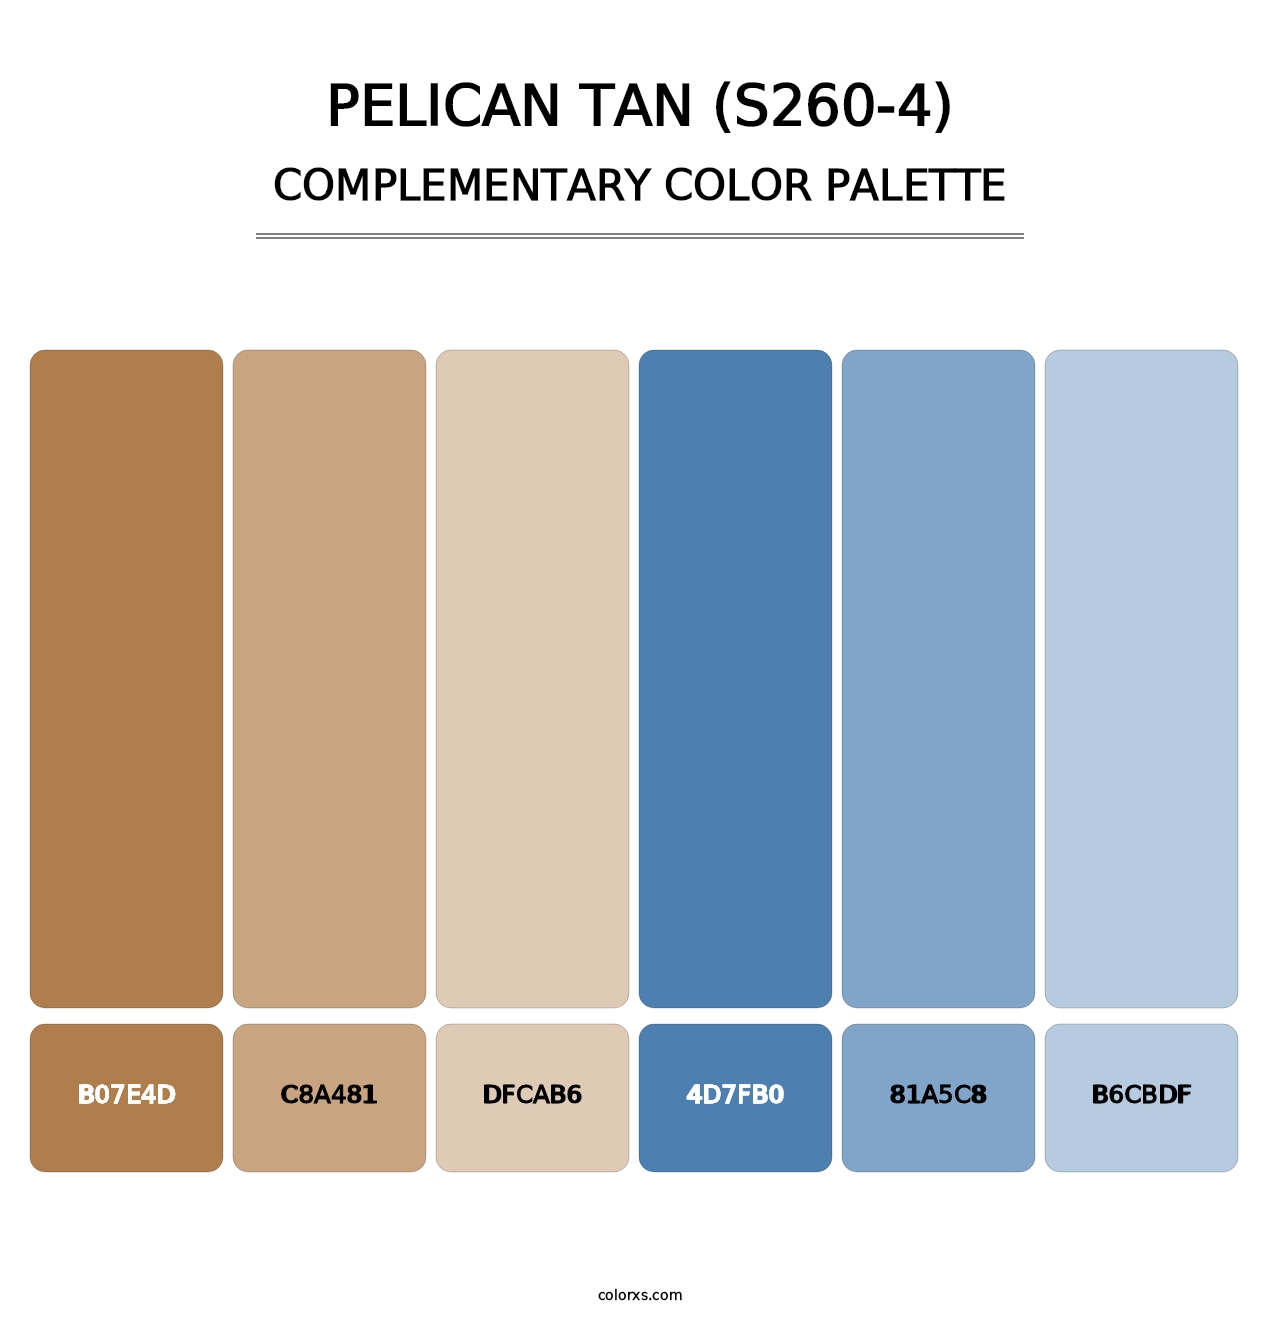 Pelican Tan (S260-4) - Complementary Color Palette